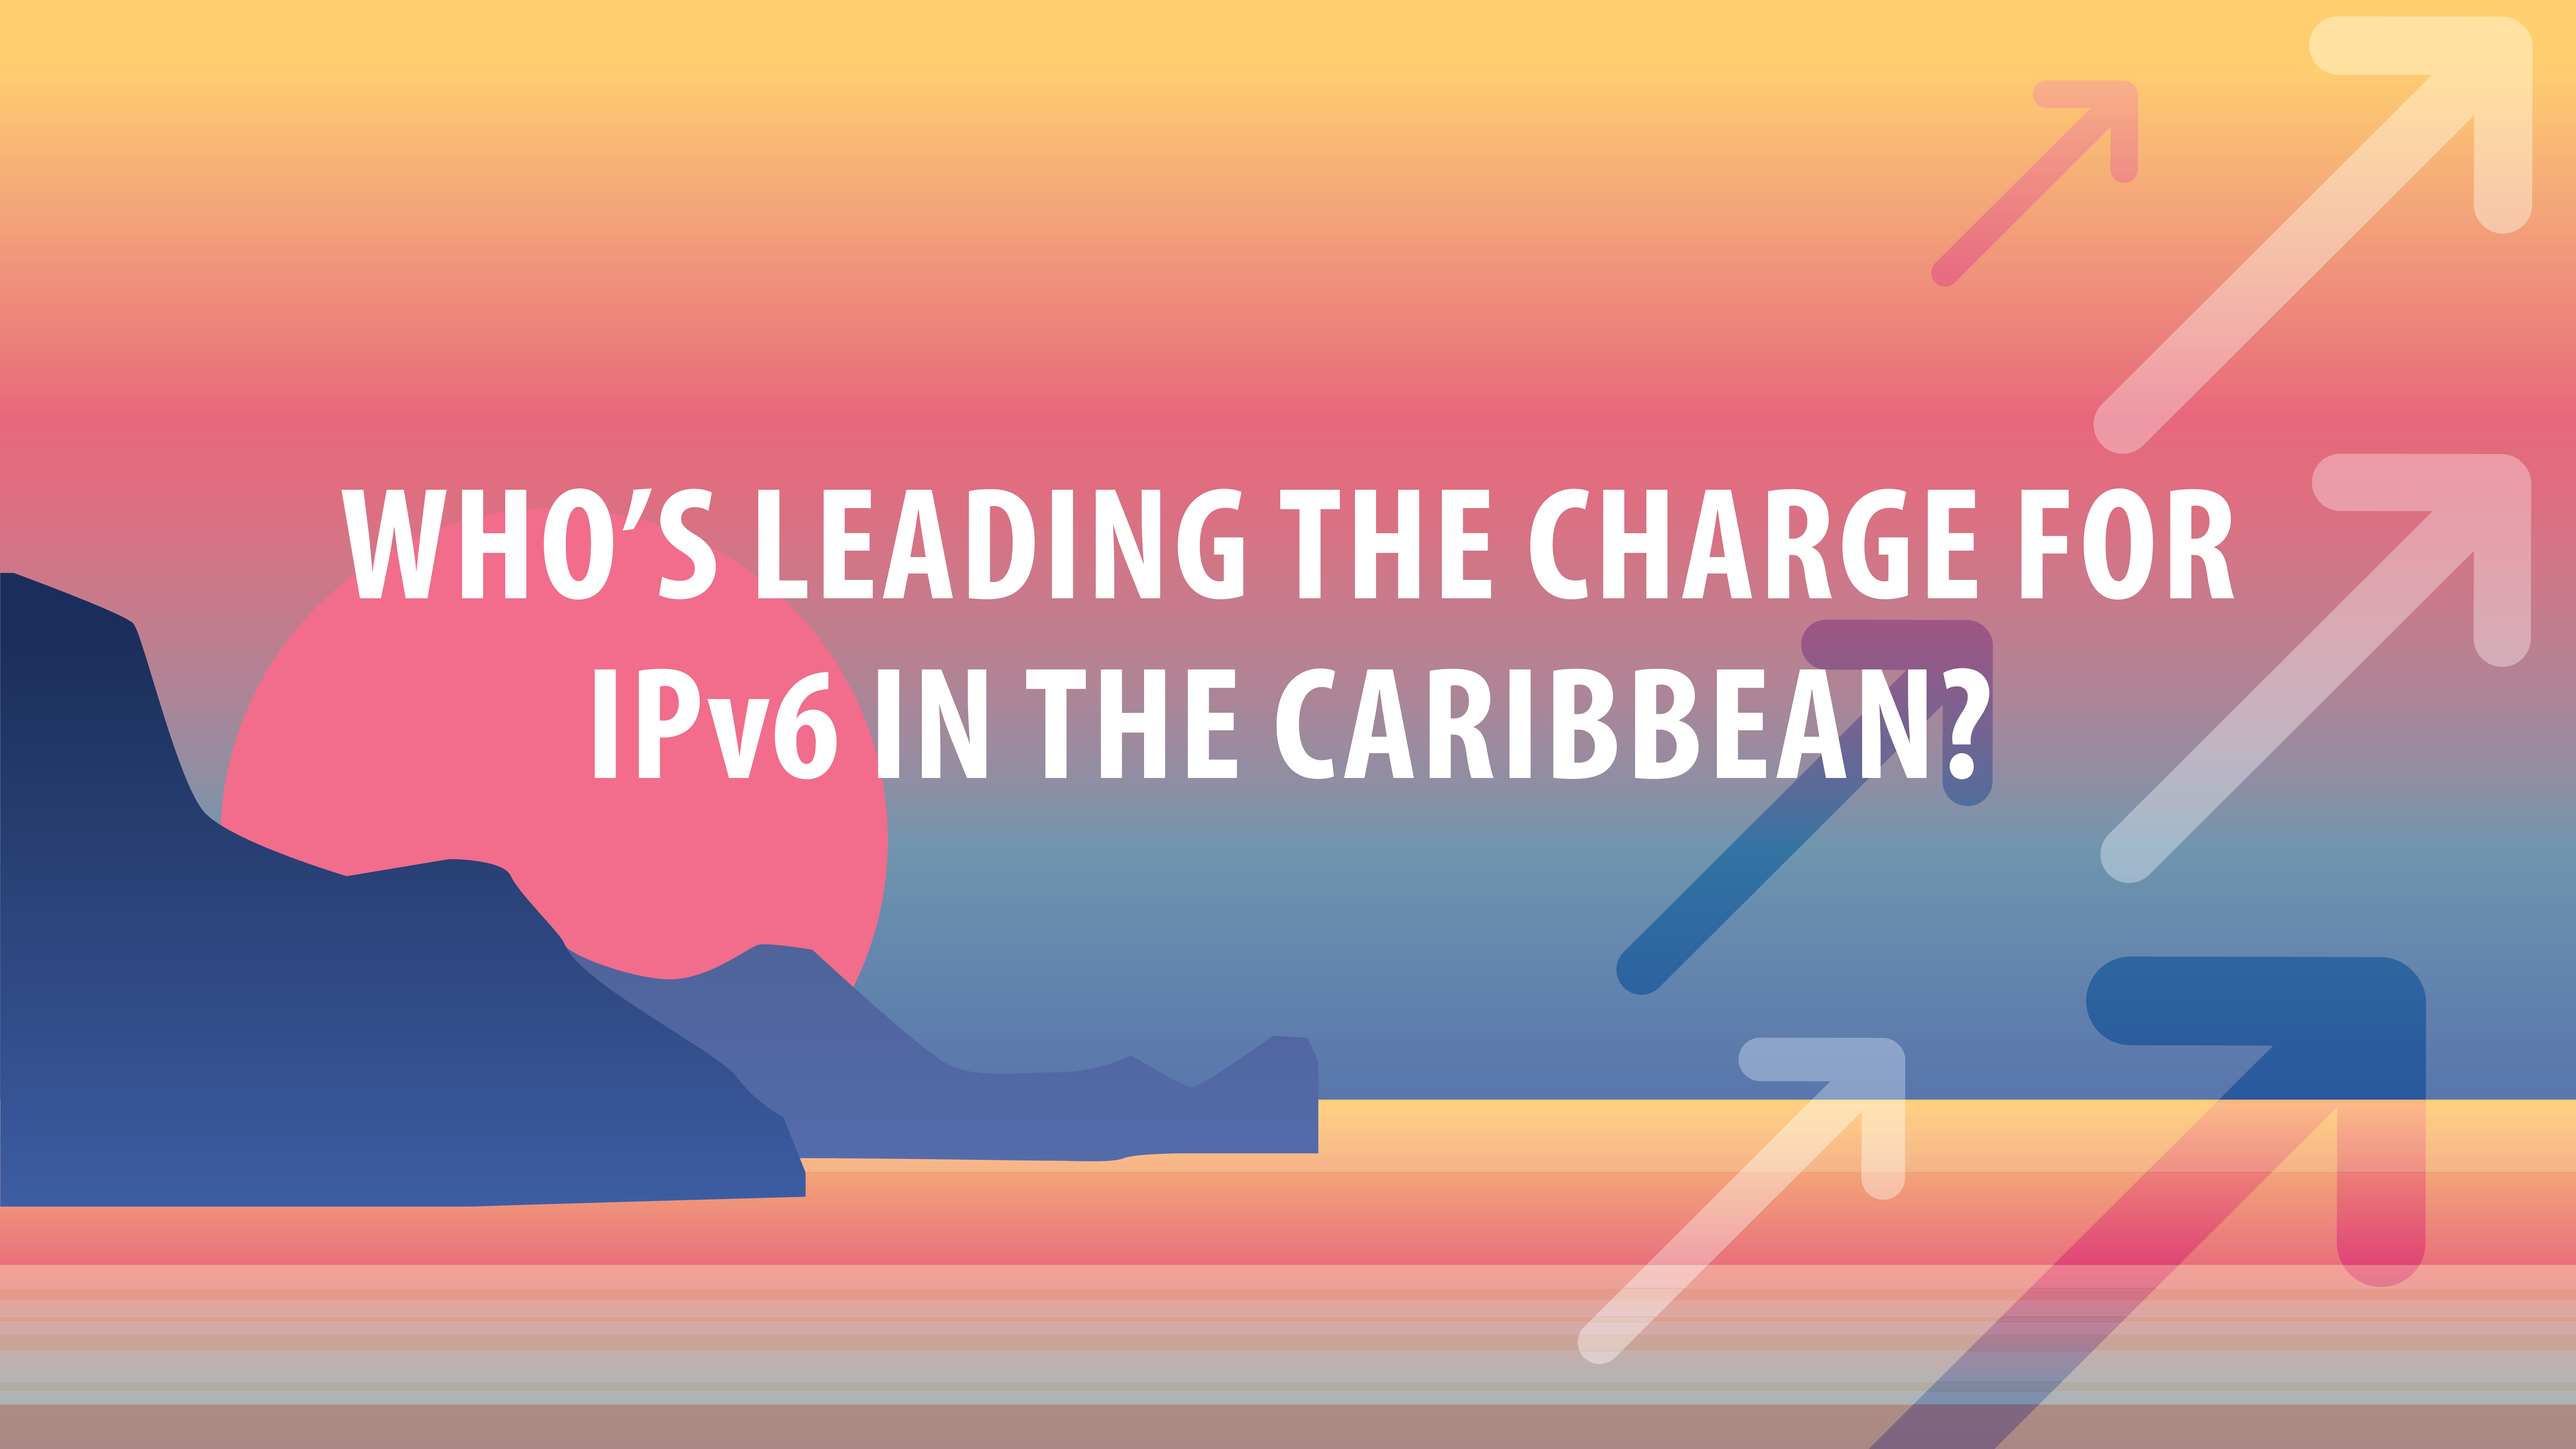 Who’s Leading the Charge for IPv6 in the Caribbean?